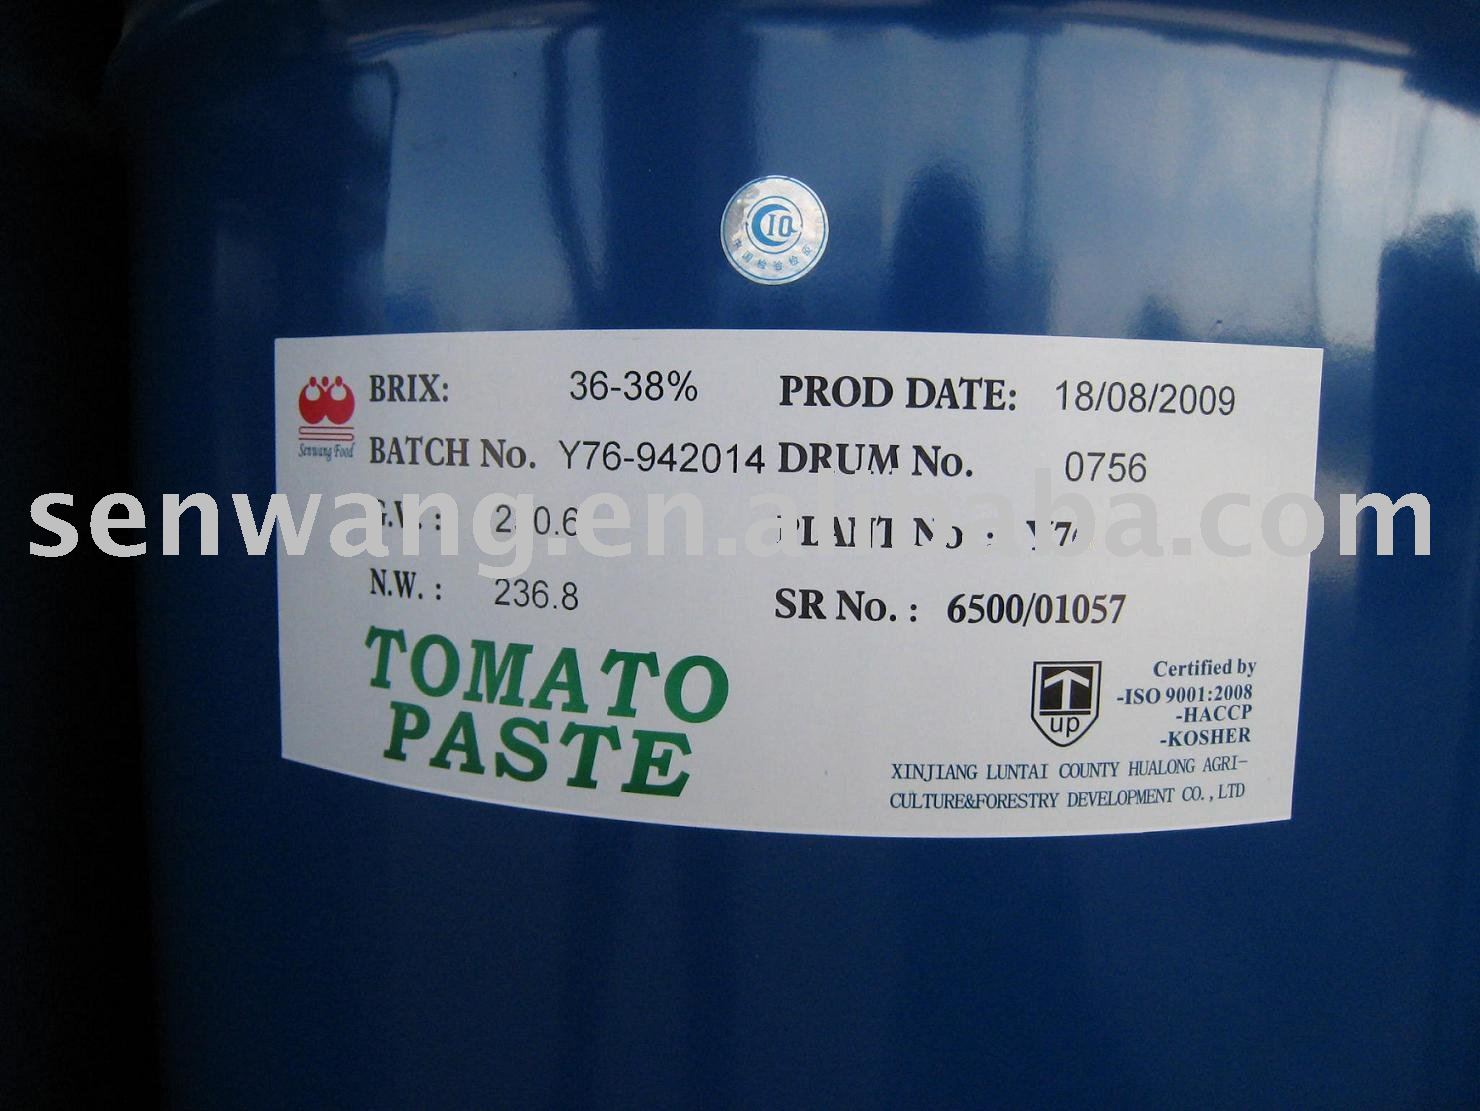 h Aseptic concentrate tomato paste brix28-30%/36-38% in drum